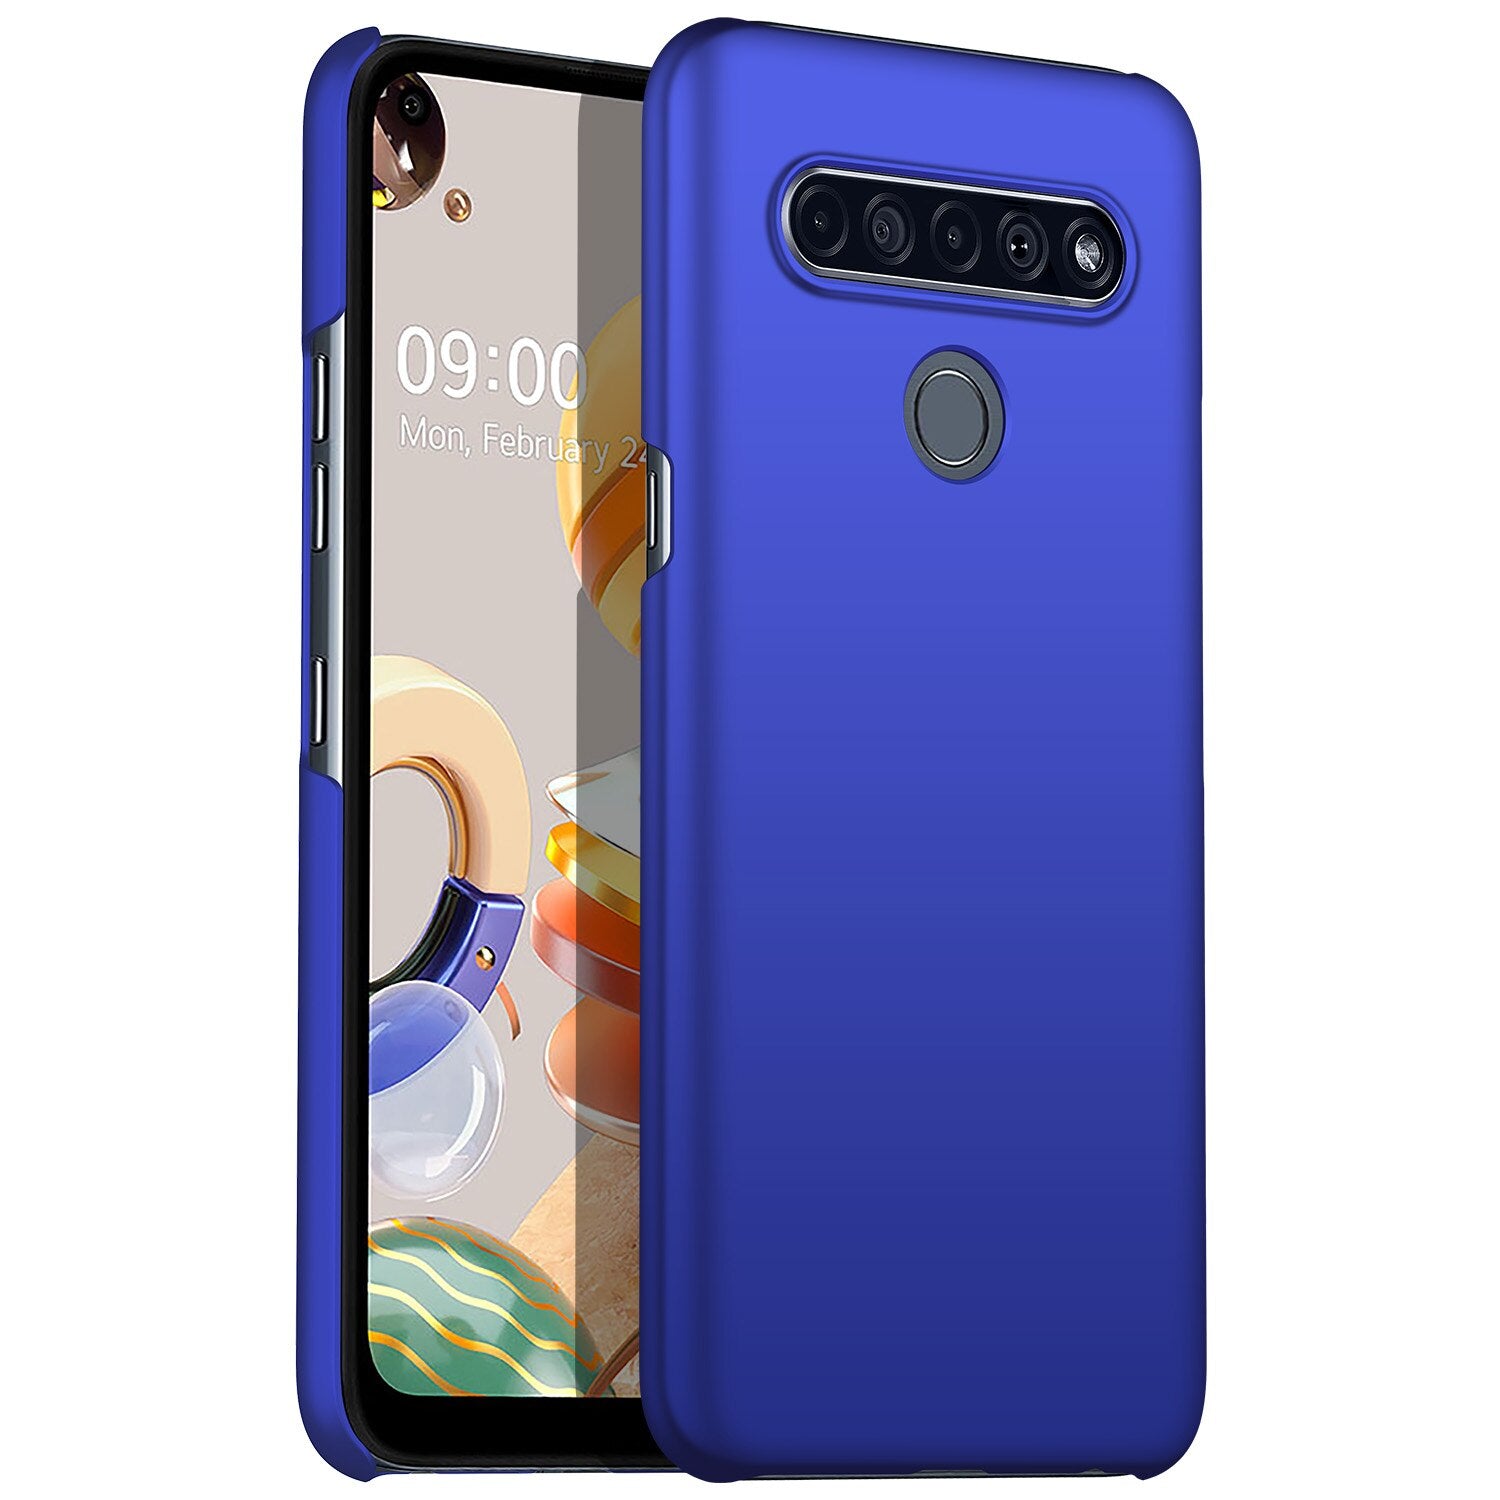 Ultra Slim Smooth Touch Silicone Case For LG Velvet Stylo 6 K61 V60 Ultra Thin Simple for LG phone case Velvet Stylo 6 K61 V60 - 380230 For LG V60 / Blue LG phone case / United States Find Epic Store